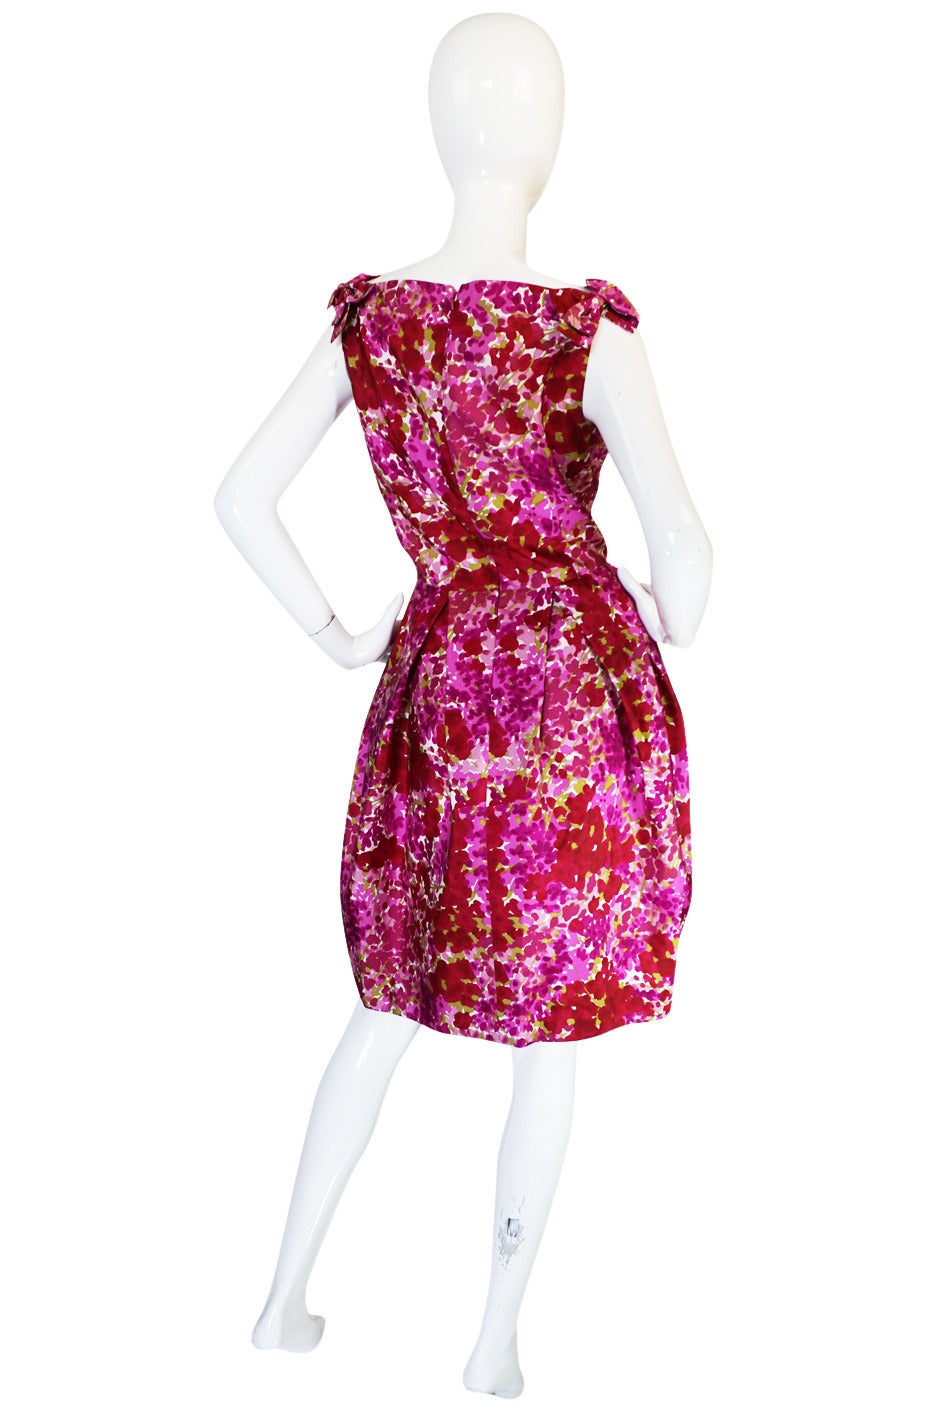 From the Dior Boutique collection comes this gorgeous little silk dress in a beautiful floral pattern made of shades of pink screened onto a lovely silk taffeta. I believe this is from the Galliano era and is a wonderful example of how he could be